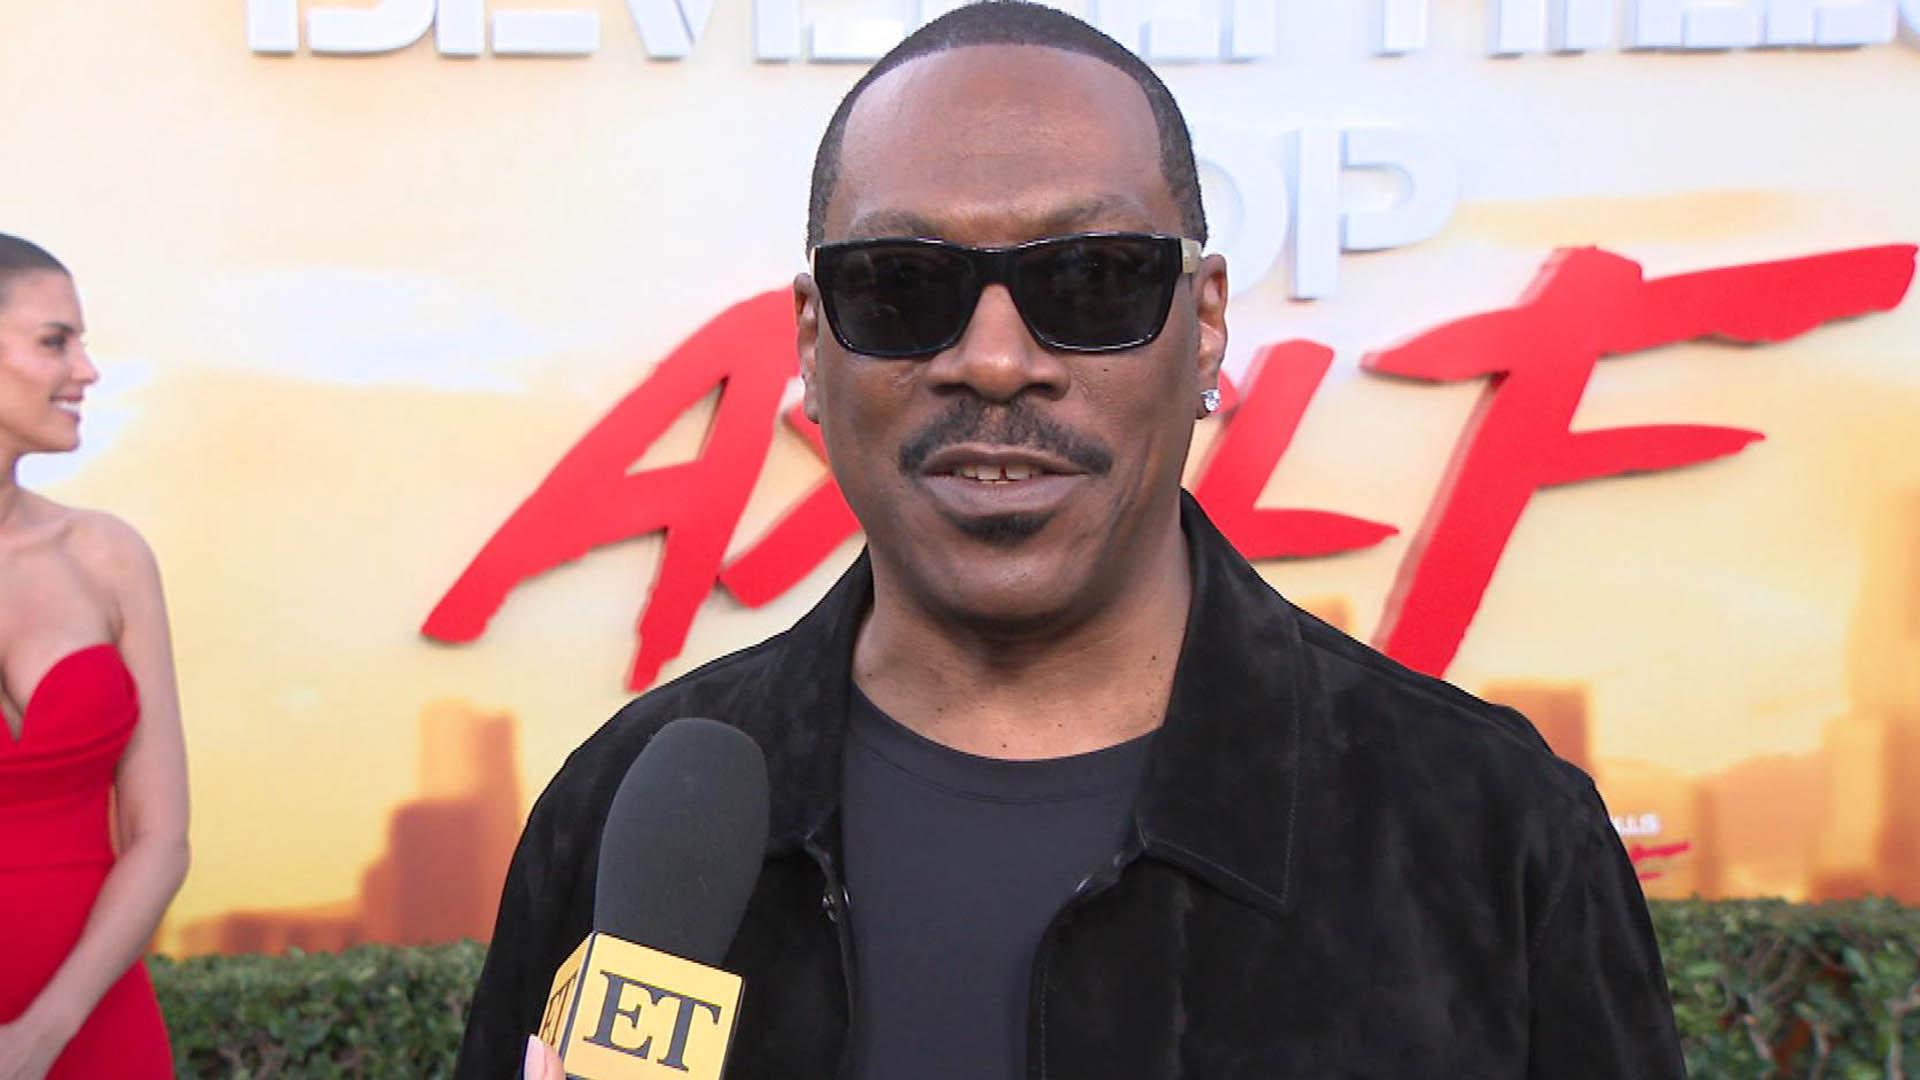 Eddie Murphy Confirms New Shrek Movies: "Shrek 5" and Donkey Spin-Off Coming